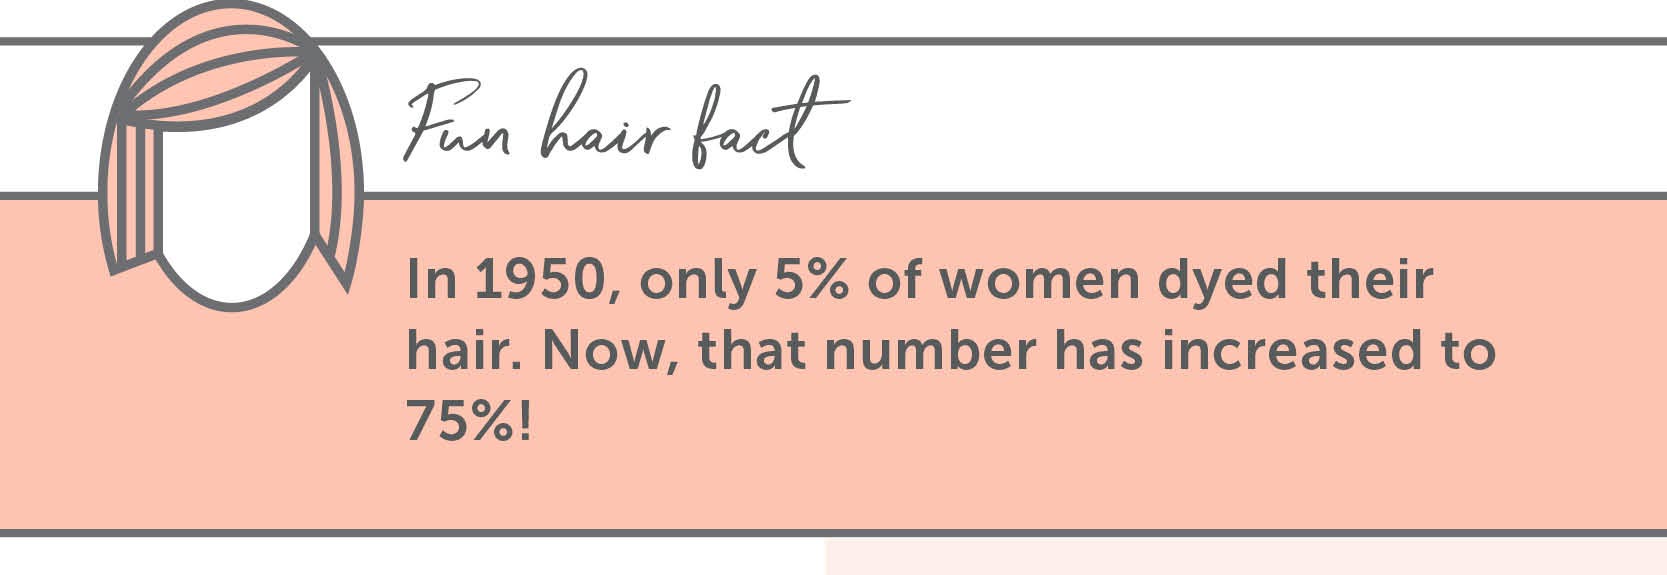 Fun hair Fact: In 1950, only 5% of women dyed their hair. Now, that number has increased to 75%!